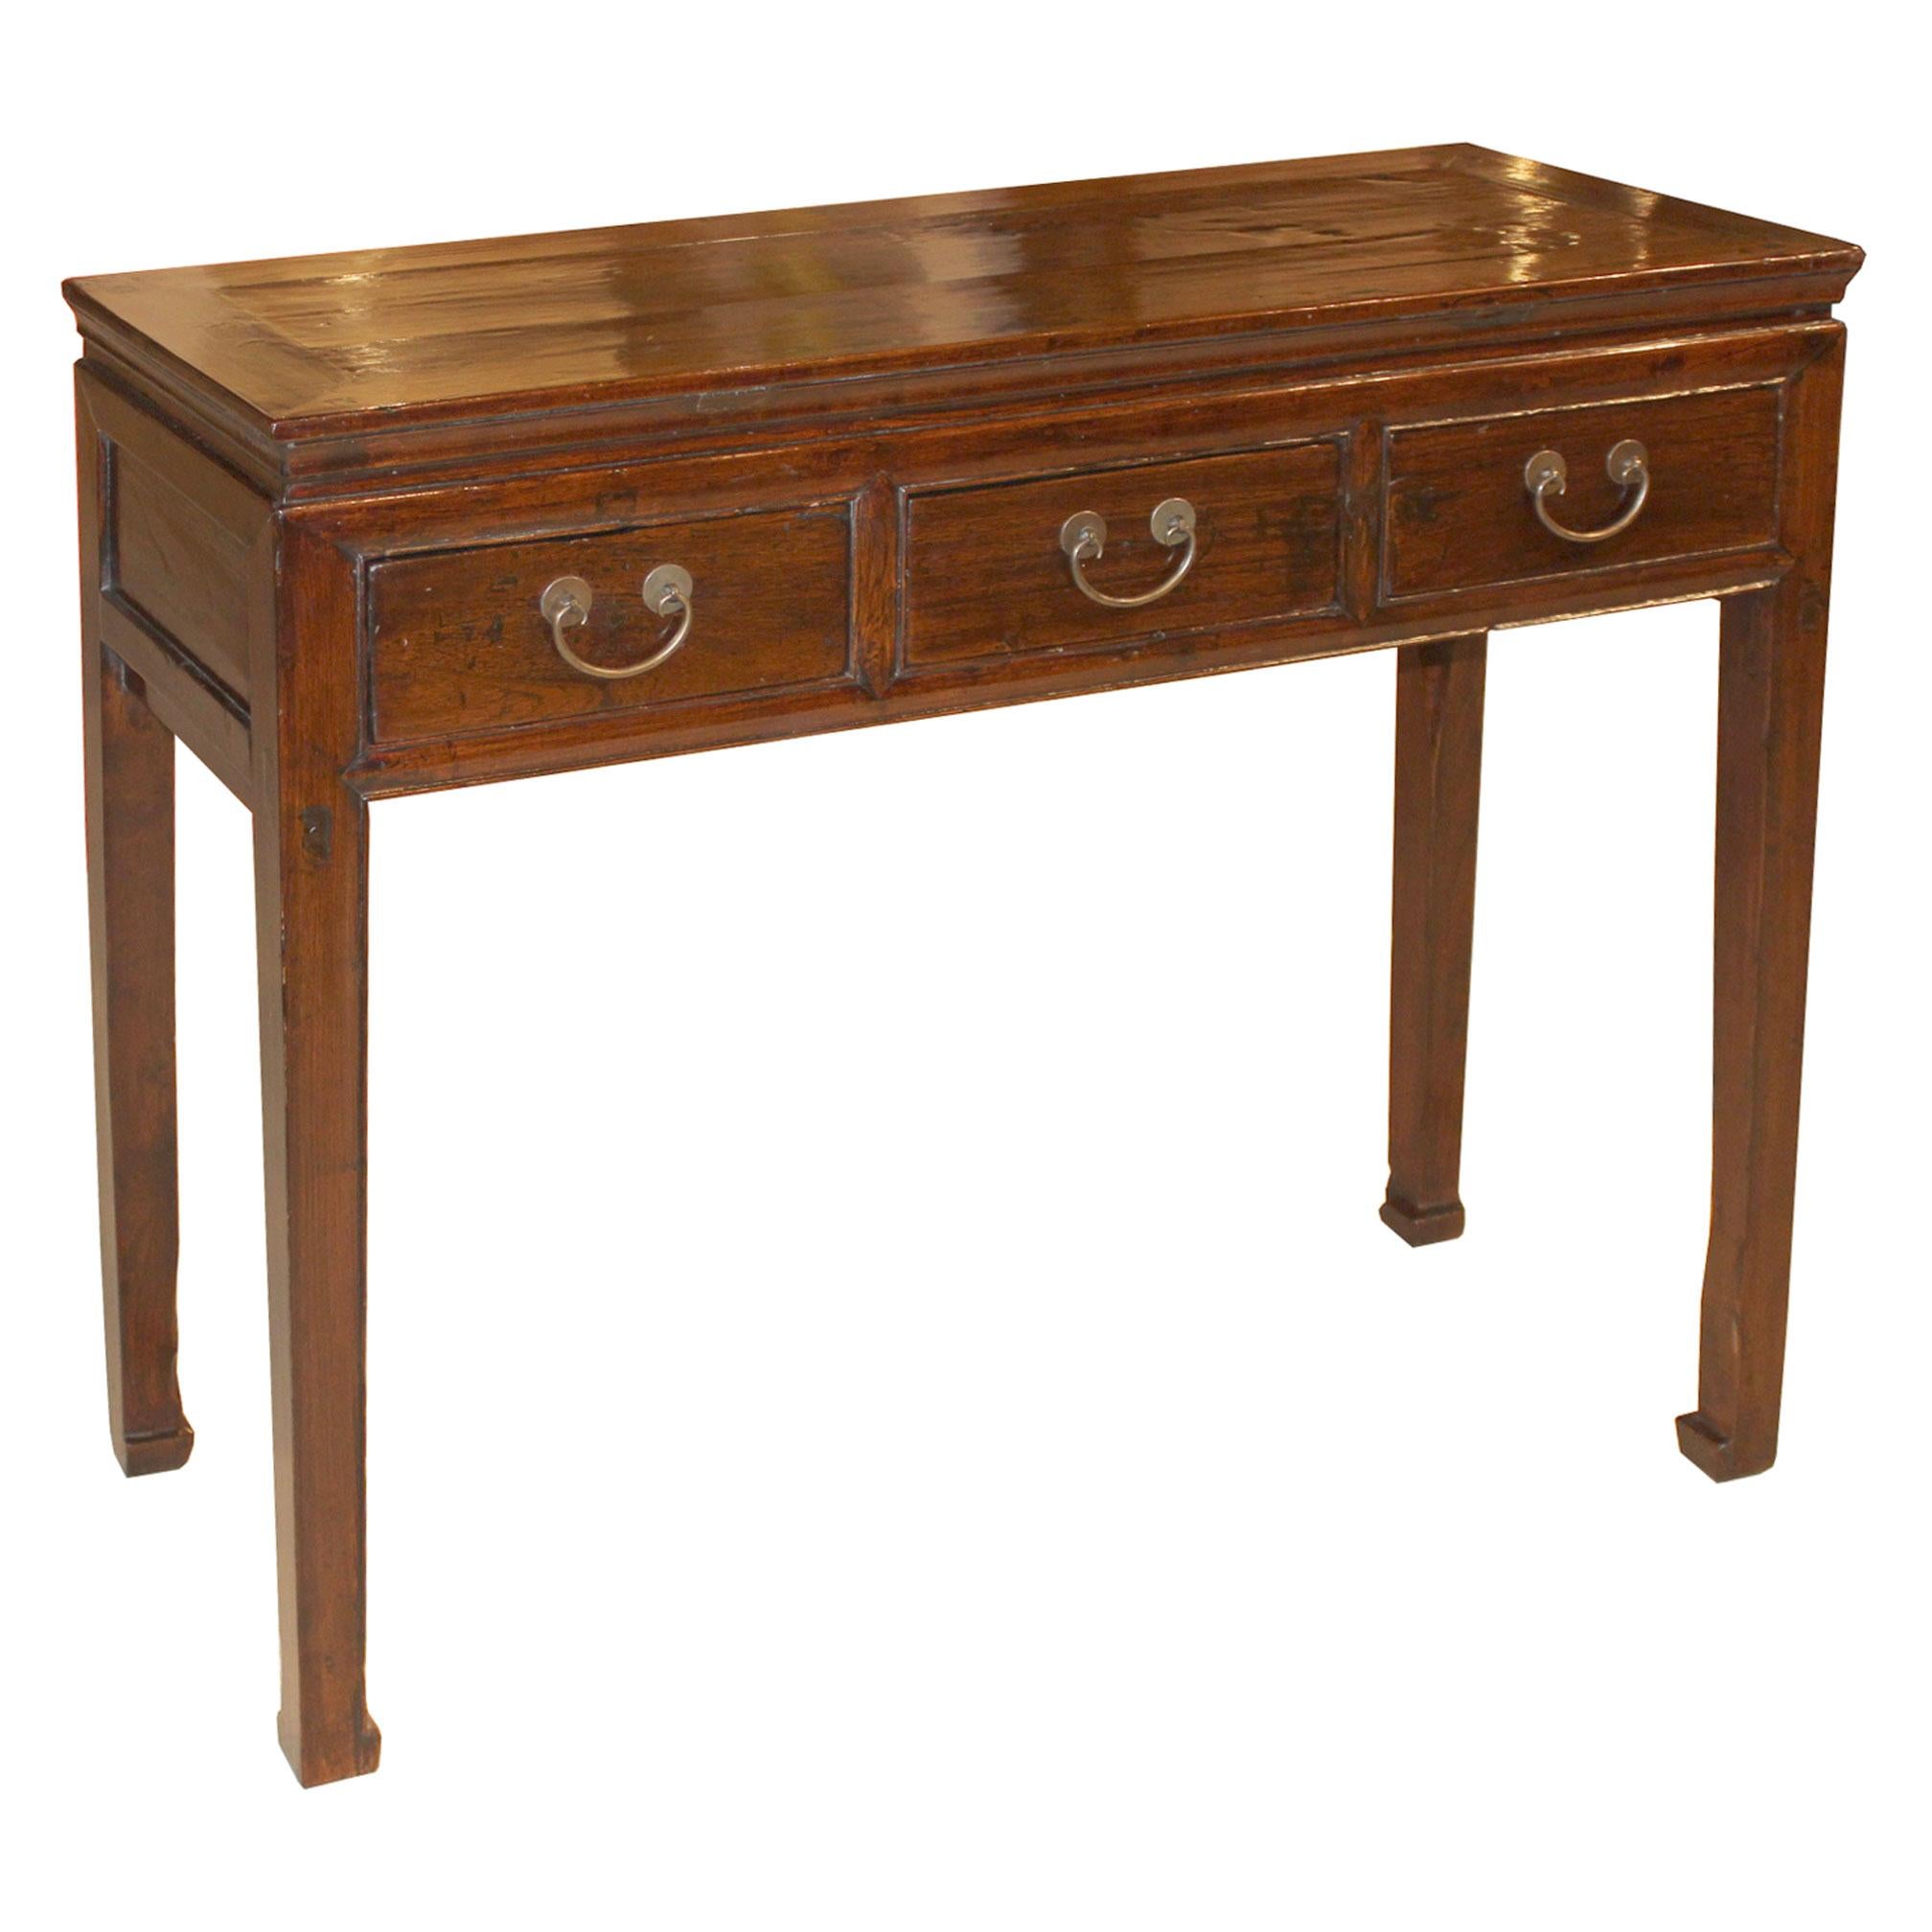 Three-drawer elm console table with horse hoof style feet. New hardware.